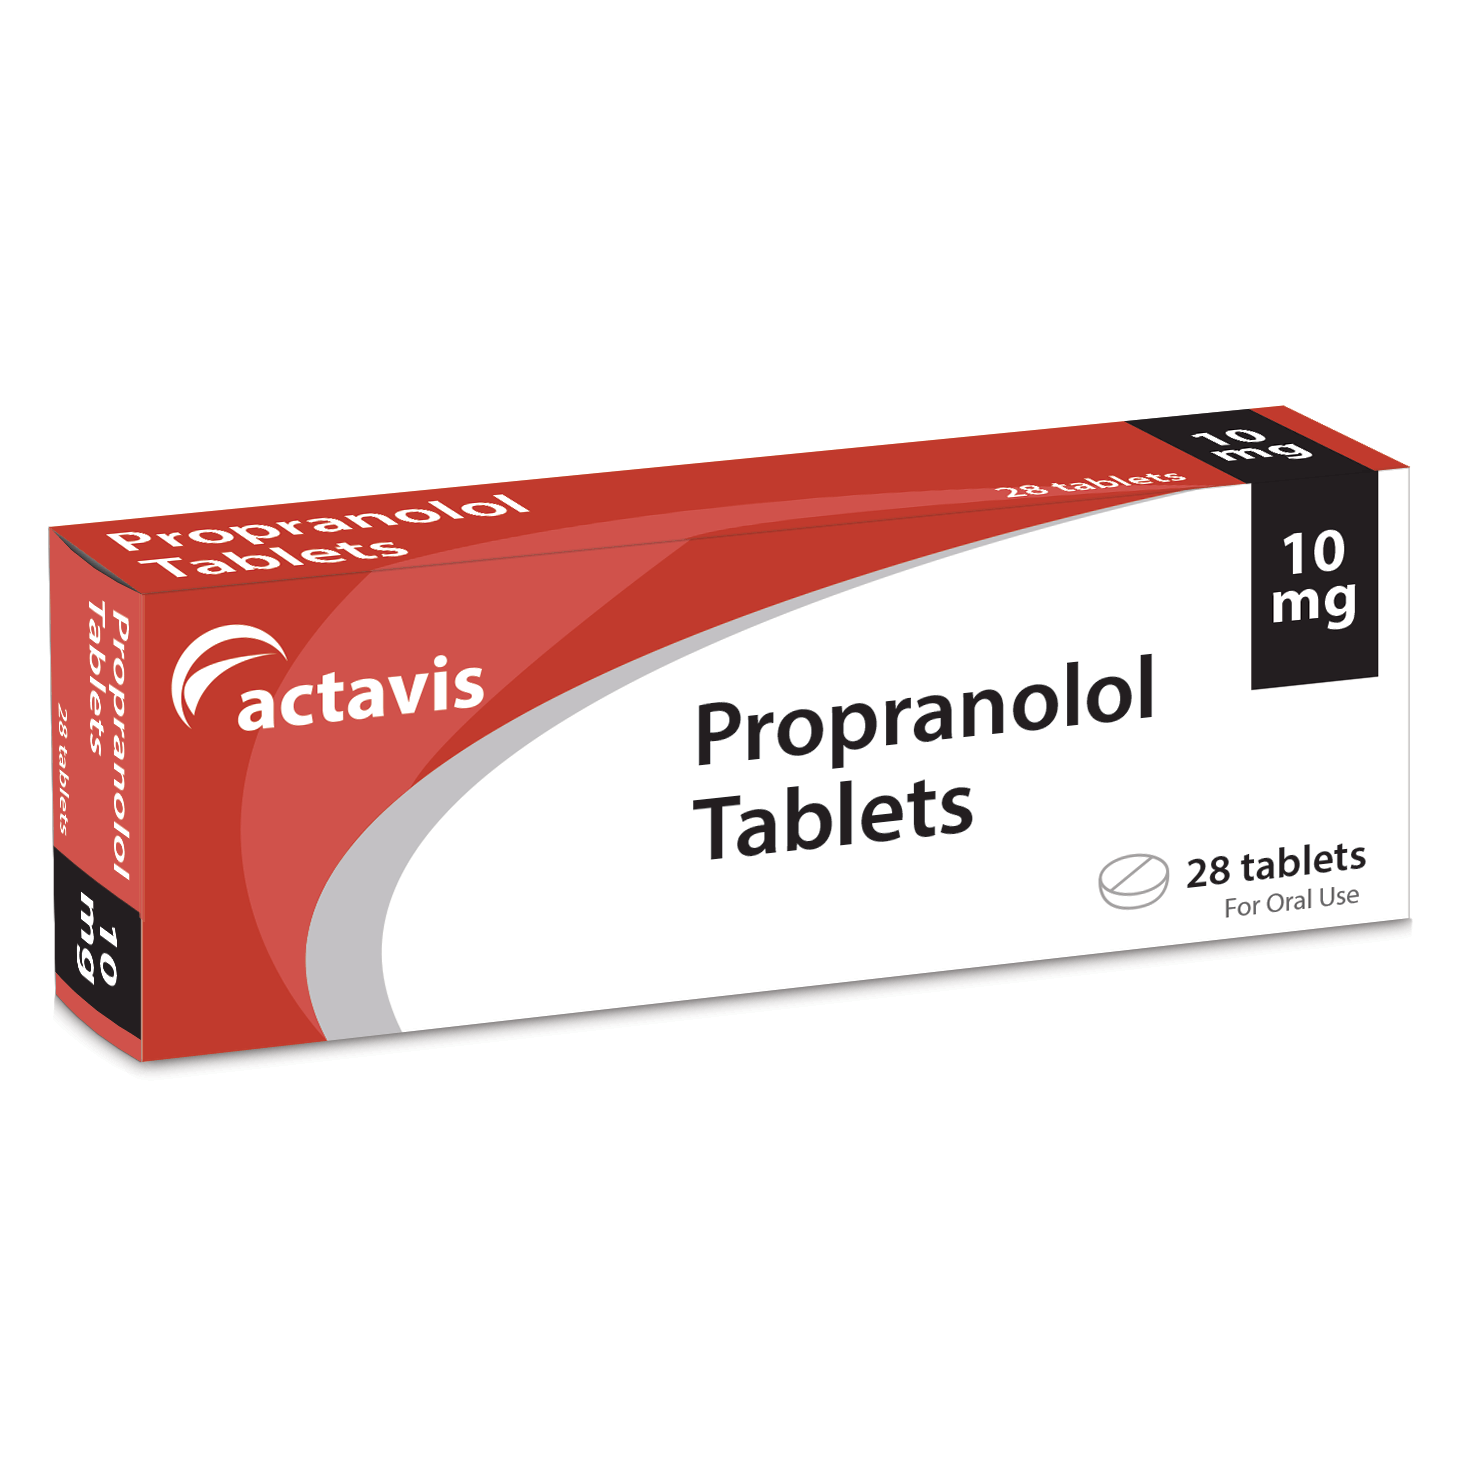 Taking Propranolol for High Blood Pressure